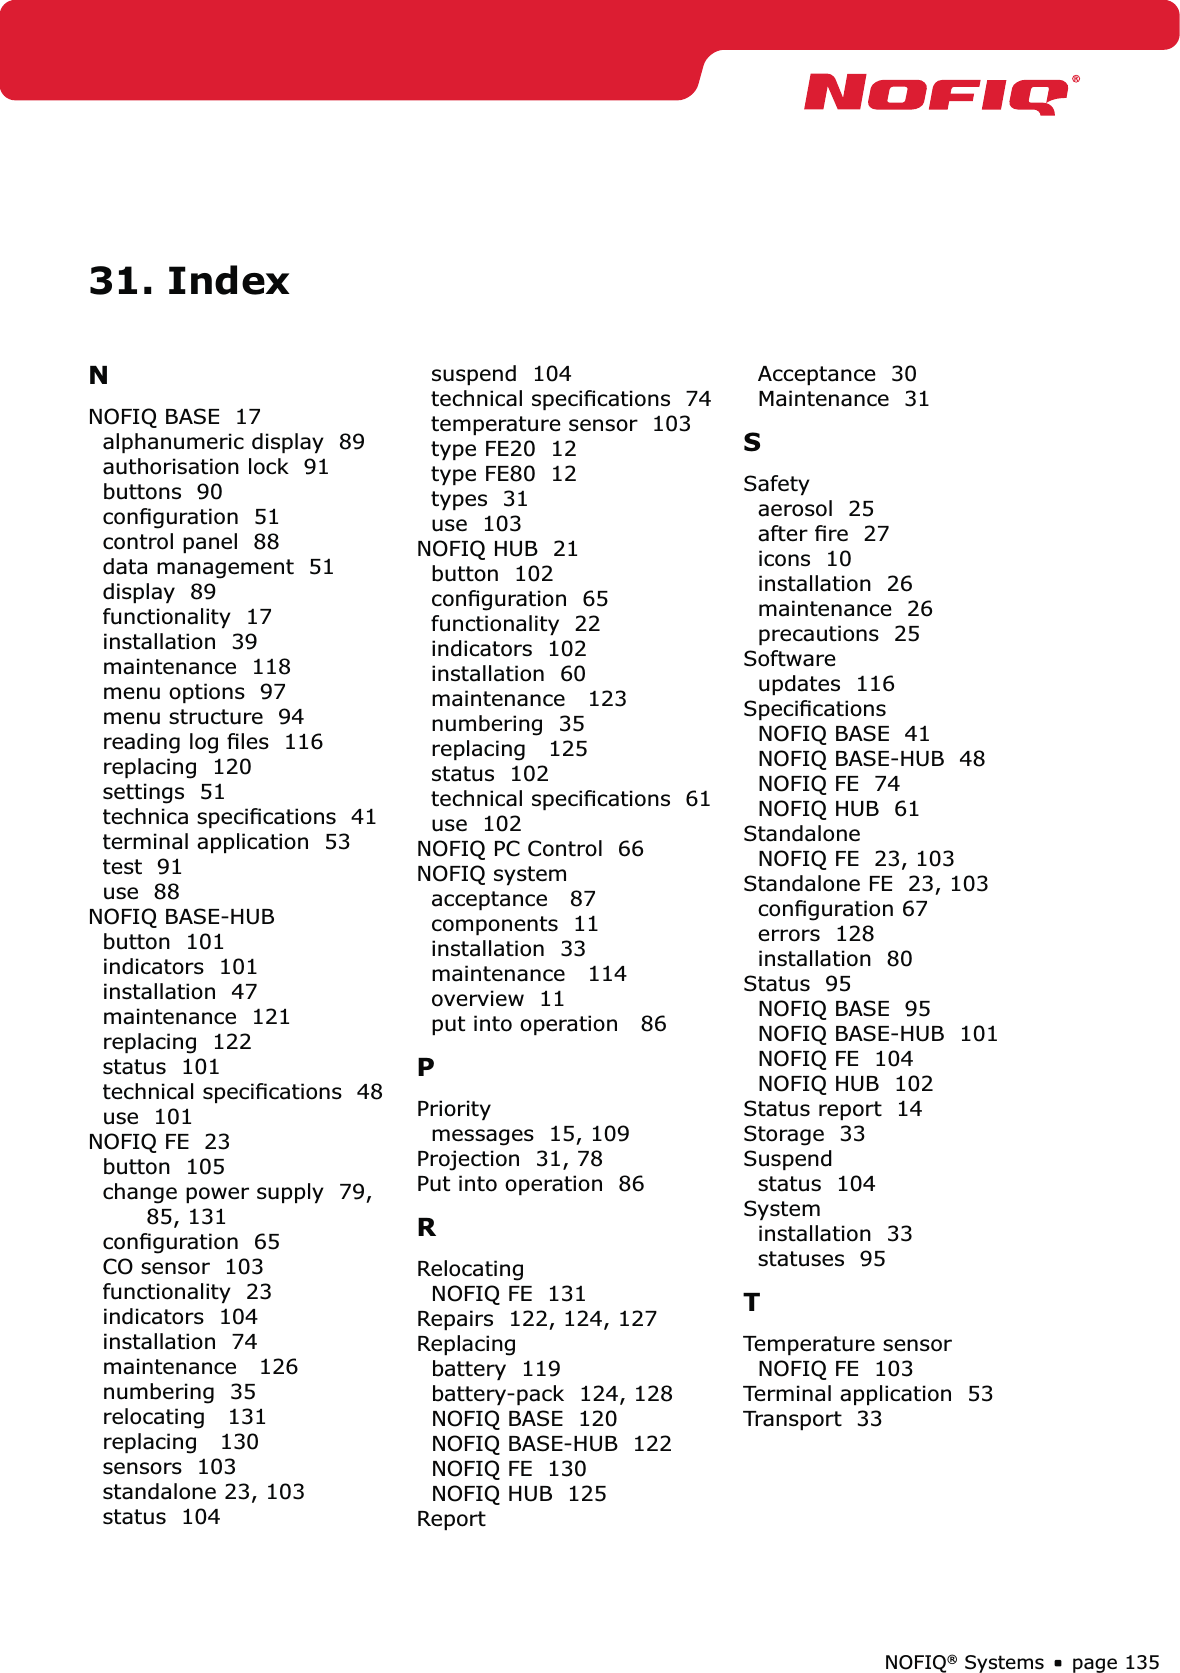 page 135NOFIQ® Systems31. IndexNNOFIQ BASE  17alphanumeric display  89authorisation lock  91buttons  90conﬁguration  51control panel  88data management  51display  89functionality  17installation  39maintenance  118menu options  97menu structure  94reading log ﬁles  116replacing  120settings  51technica speciﬁcations  41terminal application  53test  91use  88NOFIQ BASE-HUBbutton  101indicators  101installation  47maintenance  121replacing  122status  101technical speciﬁcations  48use  101NOFIQ FE  23button  105change power supply  79, 85, 131conﬁguration  65CO sensor  103functionality  23indicators  104installation  74maintenance   126numbering  35relocating   131replacing   130sensors  103standalone 23, 103status  104suspend  104technical speciﬁcations  74temperature sensor  103type FE20  12type FE80  12types  31use  103NOFIQ HUB  21button  102conﬁguration  65functionality  22indicators  102installation  60maintenance   123numbering  35replacing   125status  102technical speciﬁcations  61use  102NOFIQ PC Control  66NOFIQ systemacceptance   87components  11installation  33maintenance   114overview  11put into operation   86PPrioritymessages  15, 109Projection  31, 78Put into operation  86RRelocatingNOFIQ FE  131Repairs  122, 124, 127Replacingbattery  119battery-pack  124, 128NOFIQ BASE  120NOFIQ BASE-HUB  122NOFIQ FE  130NOFIQ HUB  125ReportAcceptance  30Maintenance  31SSafetyaerosol  25after ﬁre  27icons  10installation  26maintenance  26precautions  25Softwareupdates  116SpeciﬁcationsNOFIQ BASE  41NOFIQ BASE-HUB  48NOFIQ FE  74NOFIQ HUB  61StandaloneNOFIQ FE  23, 103Standalone FE  23, 103conﬁguration 67errors  128installation  80Status  95NOFIQ BASE  95NOFIQ BASE-HUB  101NOFIQ FE  104NOFIQ HUB  102Status report  14Storage  33Suspendstatus  104Systeminstallation  33statuses  95TTemperature sensorNOFIQ FE  103Terminal application  53Transport  33